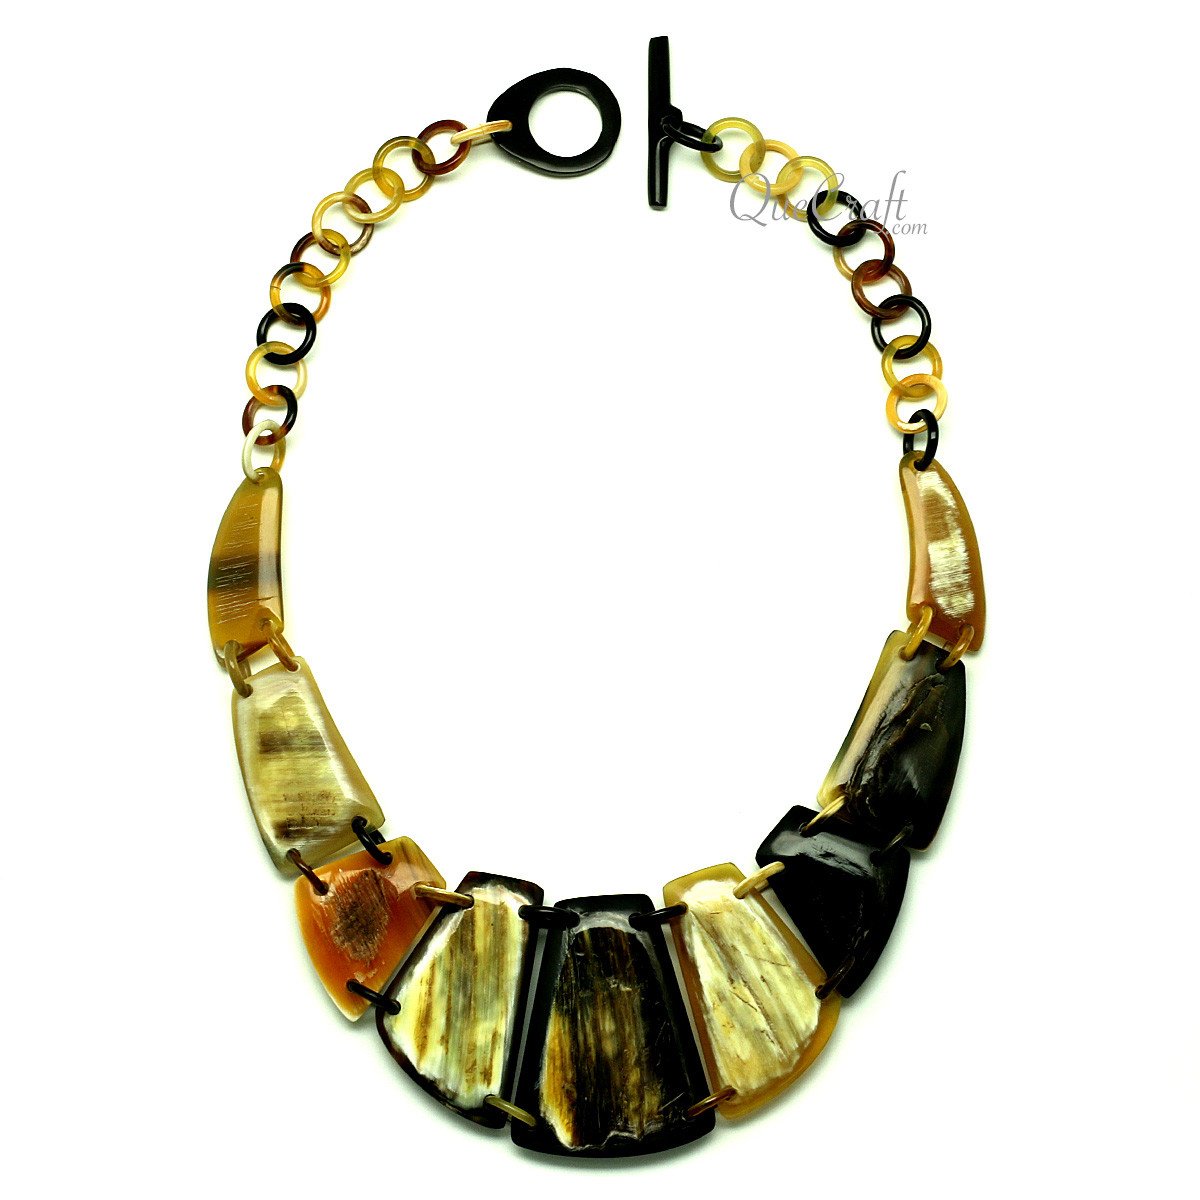 Horn Chain Necklace #12896 - HORN JEWELRY